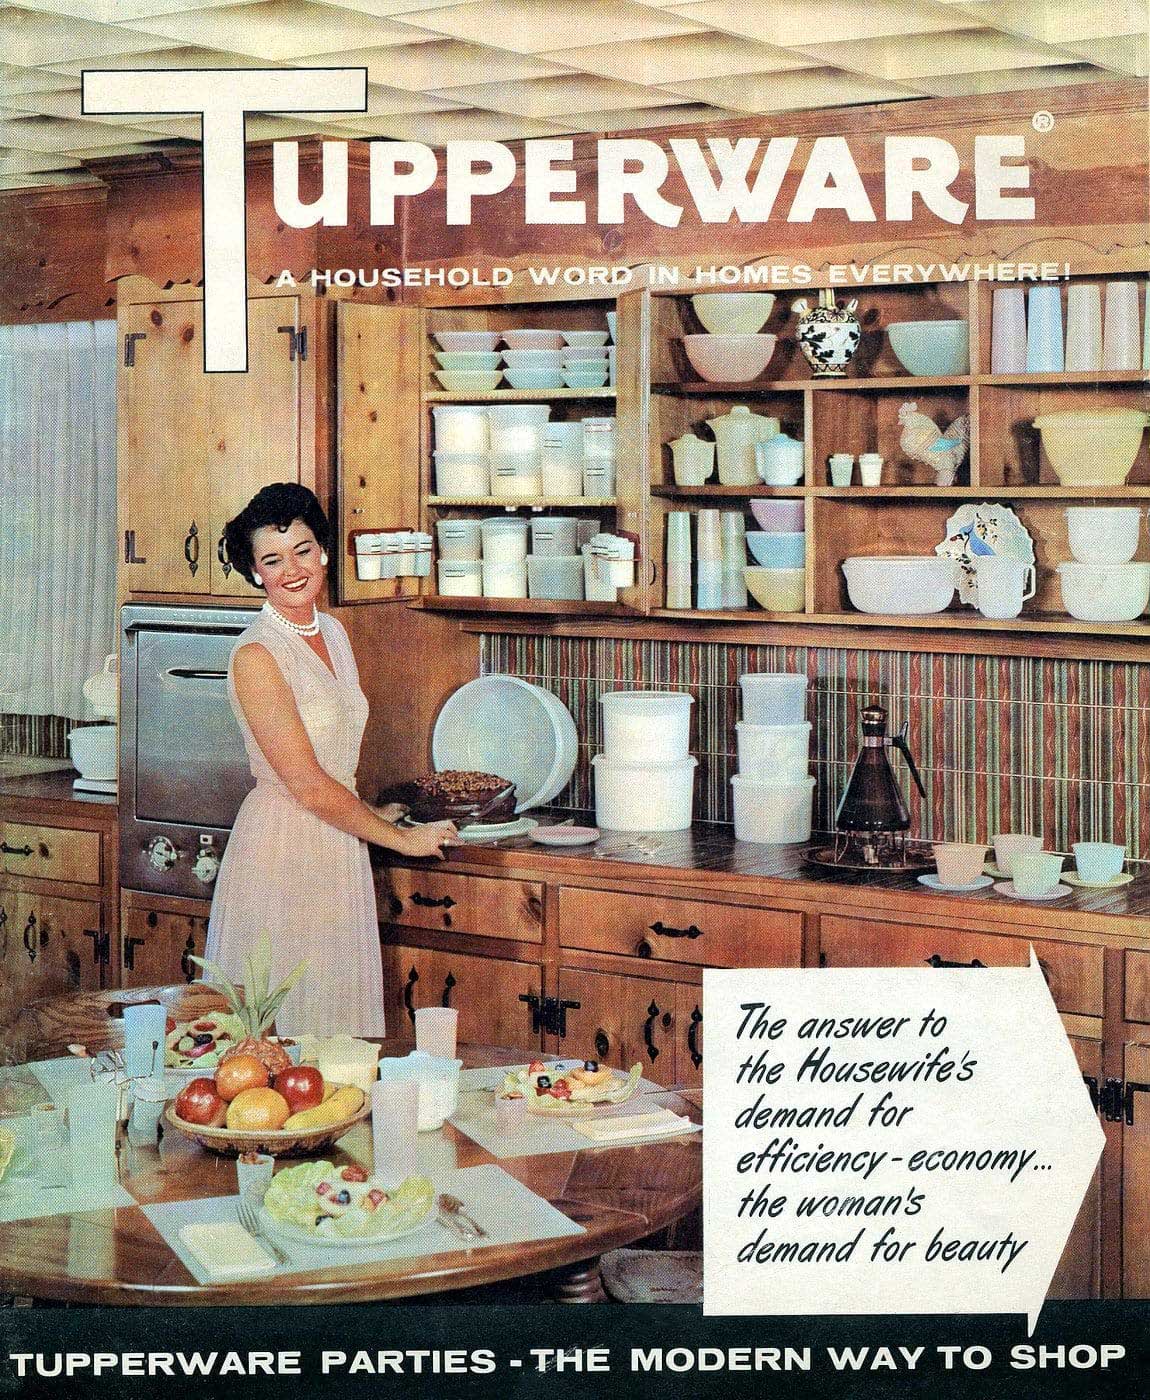 Tupperware from the 1950s